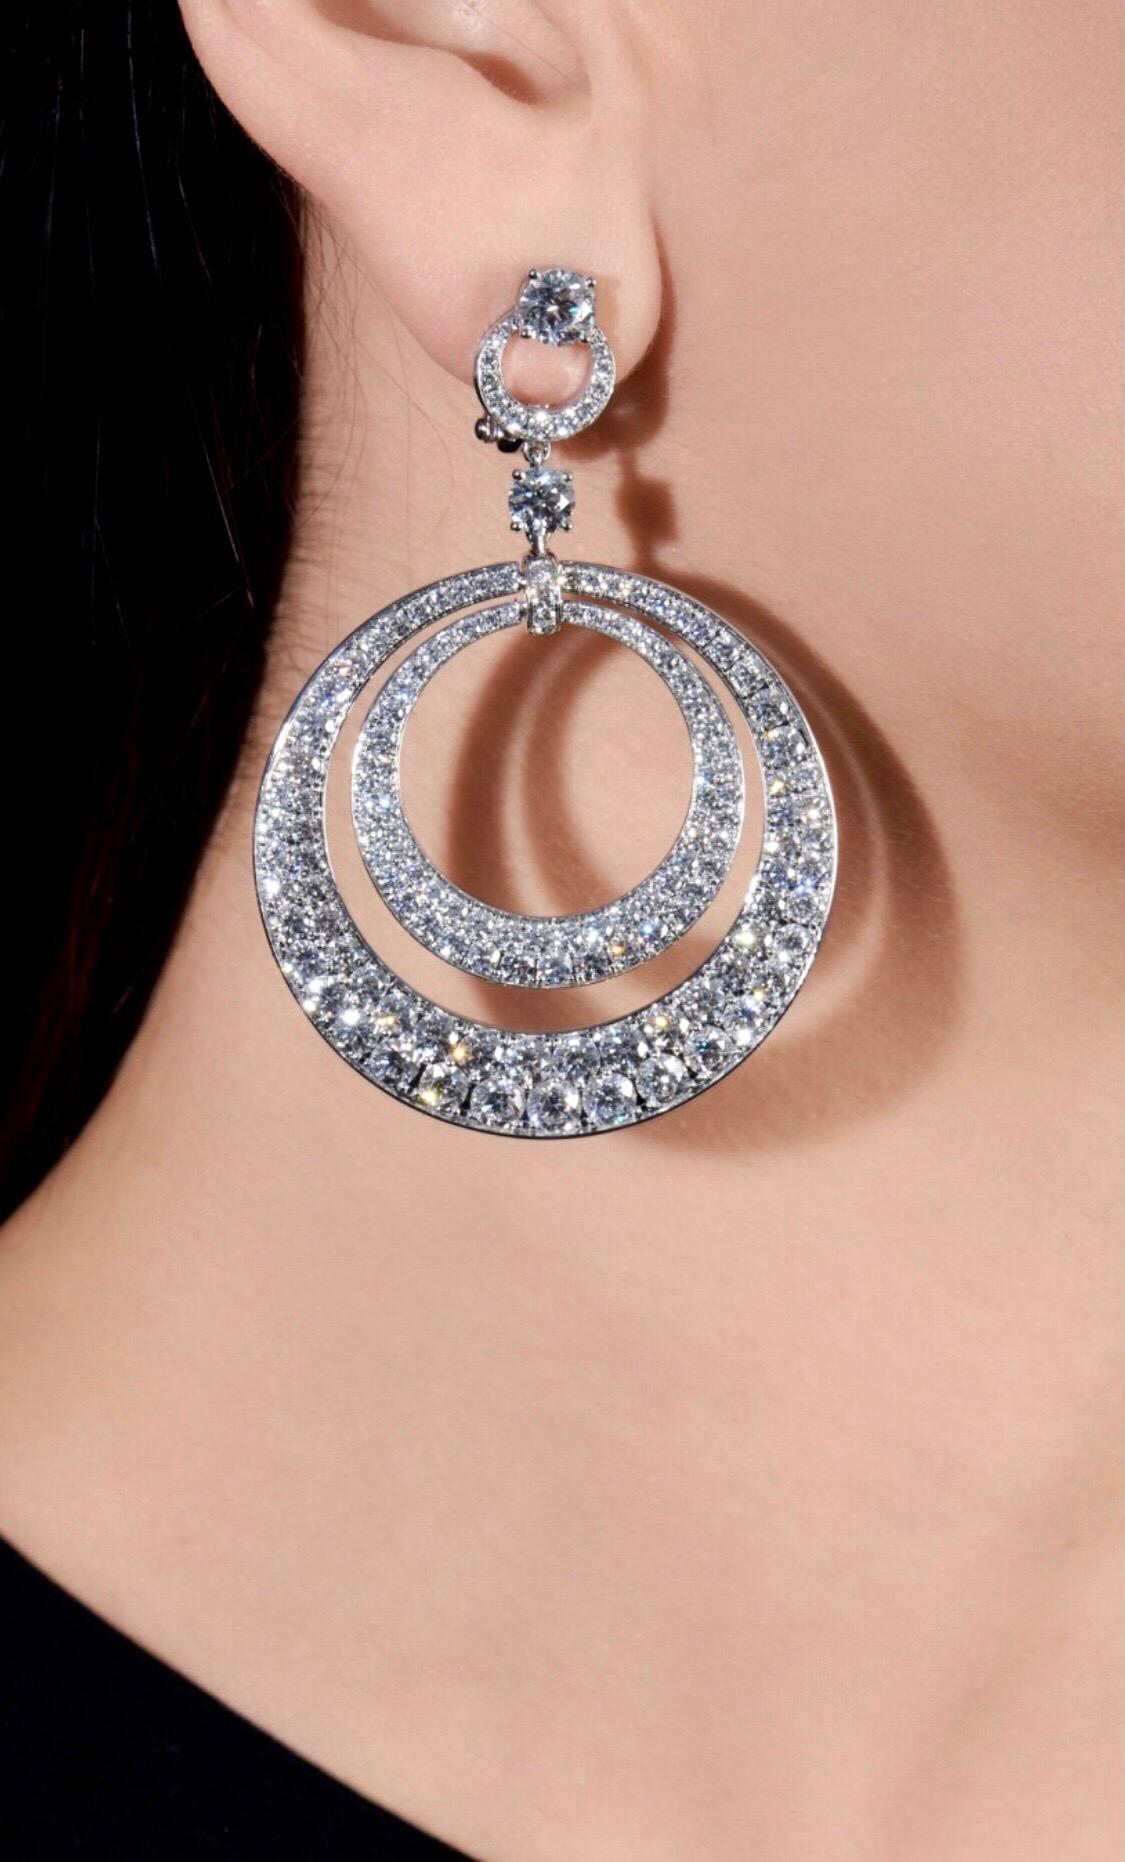 An incredible set Graff diamond earrings showcasing a double hoop design set with brilliant-cut diamonds totalling 17,80cts appx. The earrings have a post and hinge back fittings for safety. The earrings are signed Graff, numbered, and include pouch